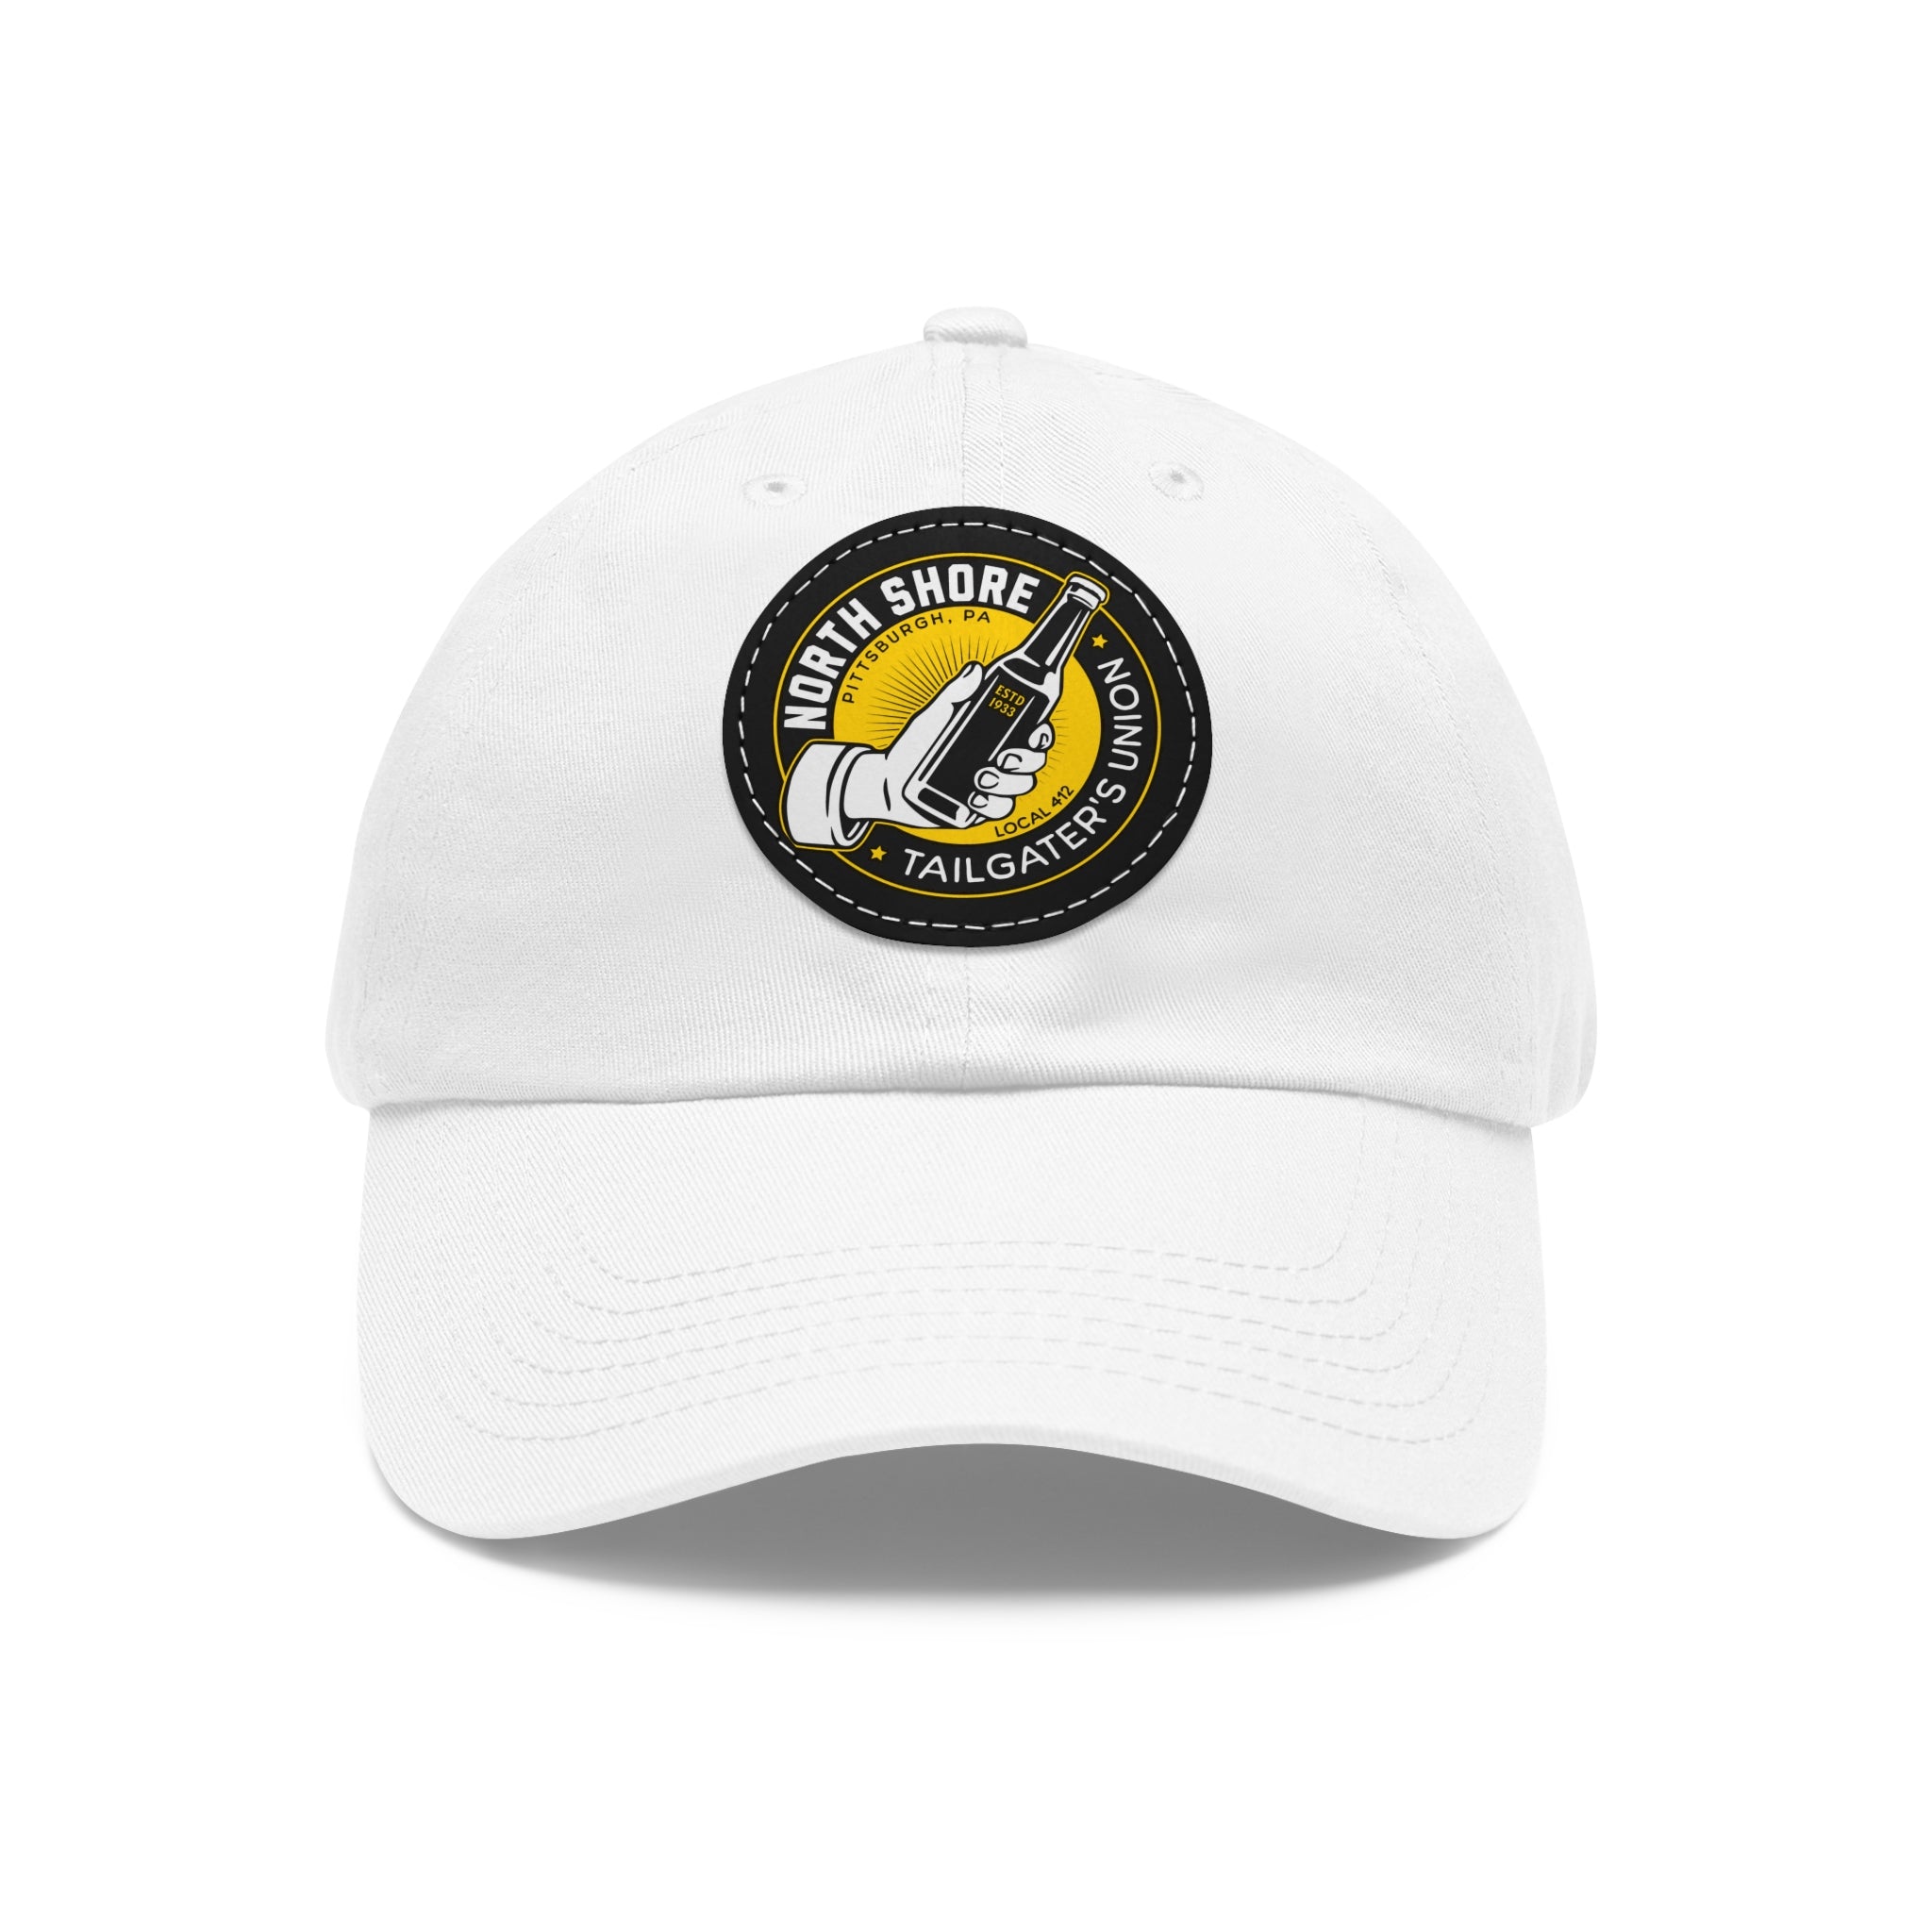 North Shore Tailgater's Union - Patch Hat